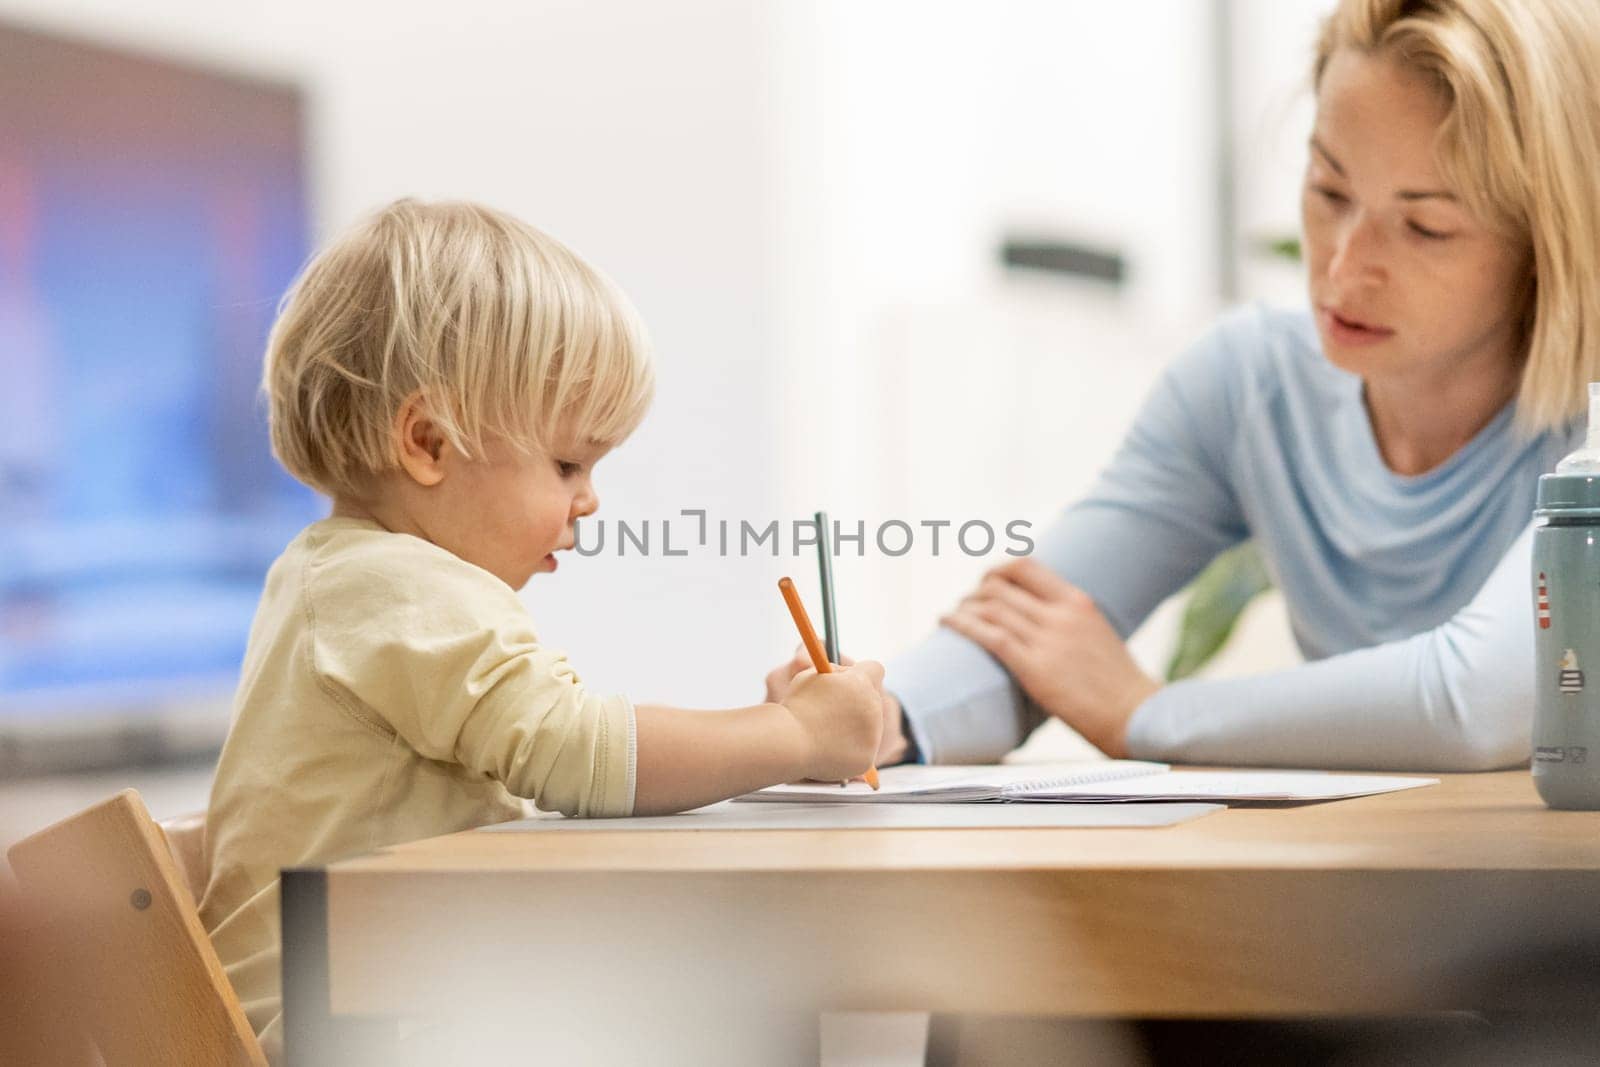 Caring young Caucasian mother and small son drawing painting in notebook at home together. Loving mom or nanny having fun learning and playing with her little 1,5 year old infant baby boy child